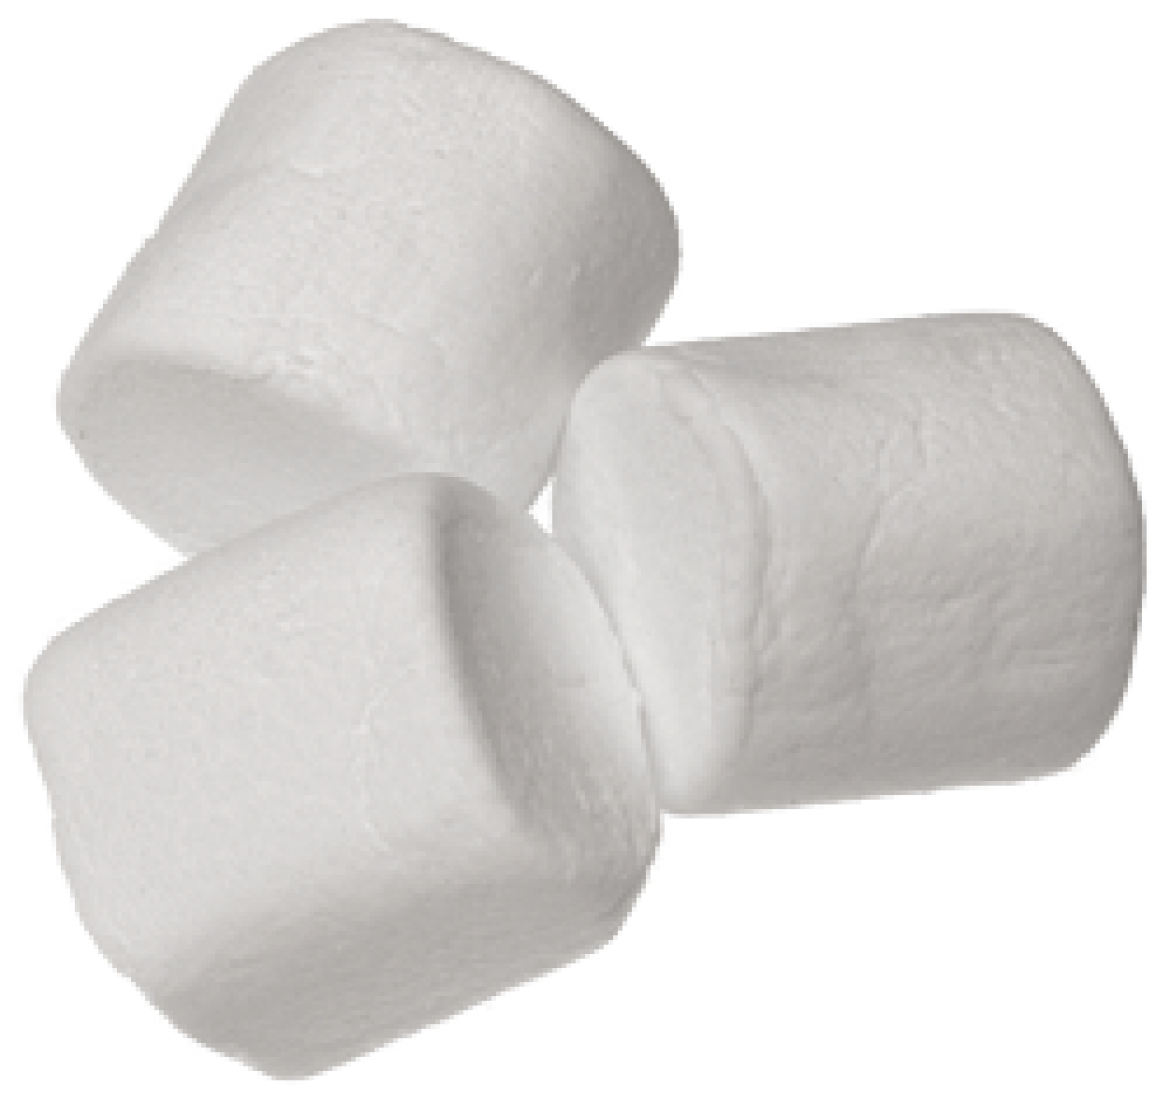 Png Hd Marshmallows Transparent Hd Marshmallows Png Images Pluspng